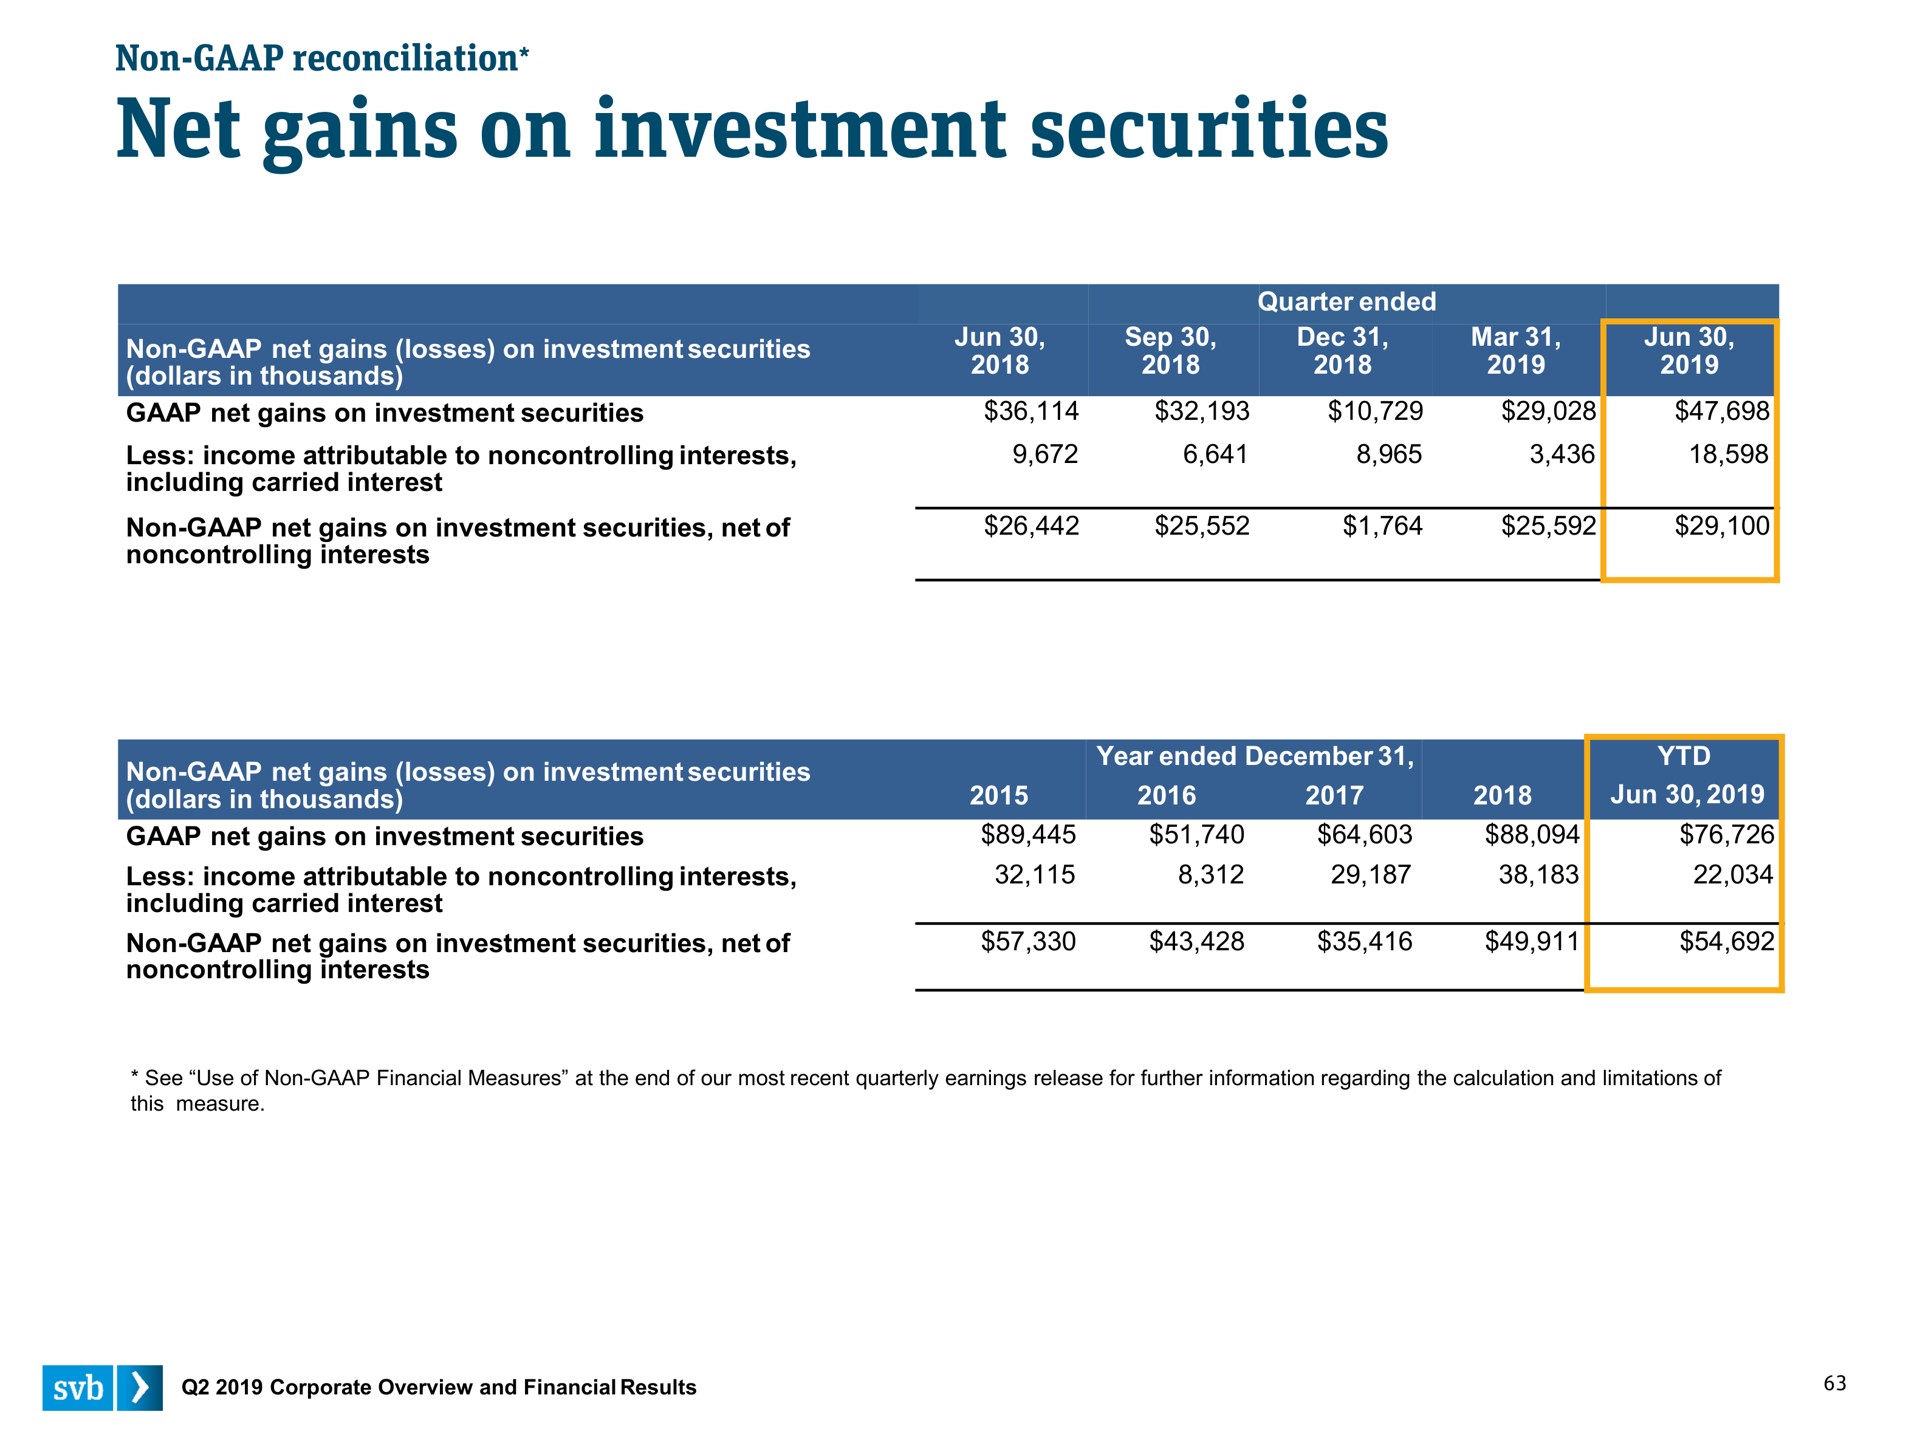 net gains on investment securities | Silicon Valley Bank